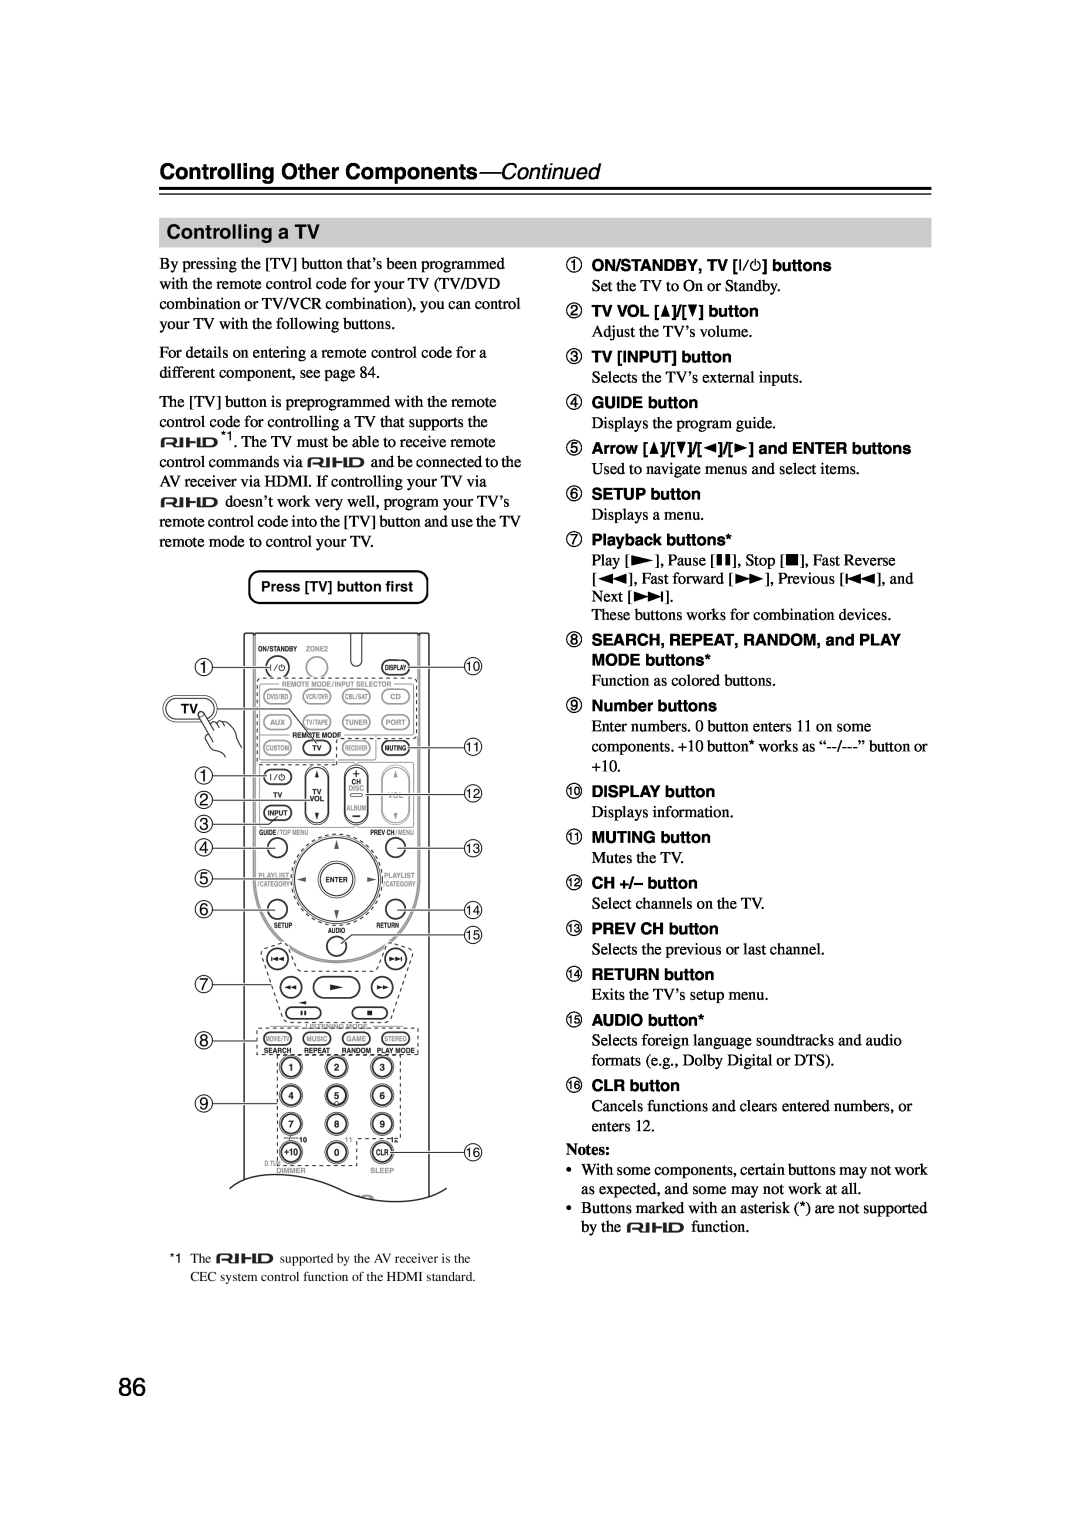 Onkyo 29344937, HT-S6200 instruction manual Controlling a TV, Controlling Other Components—Continued 